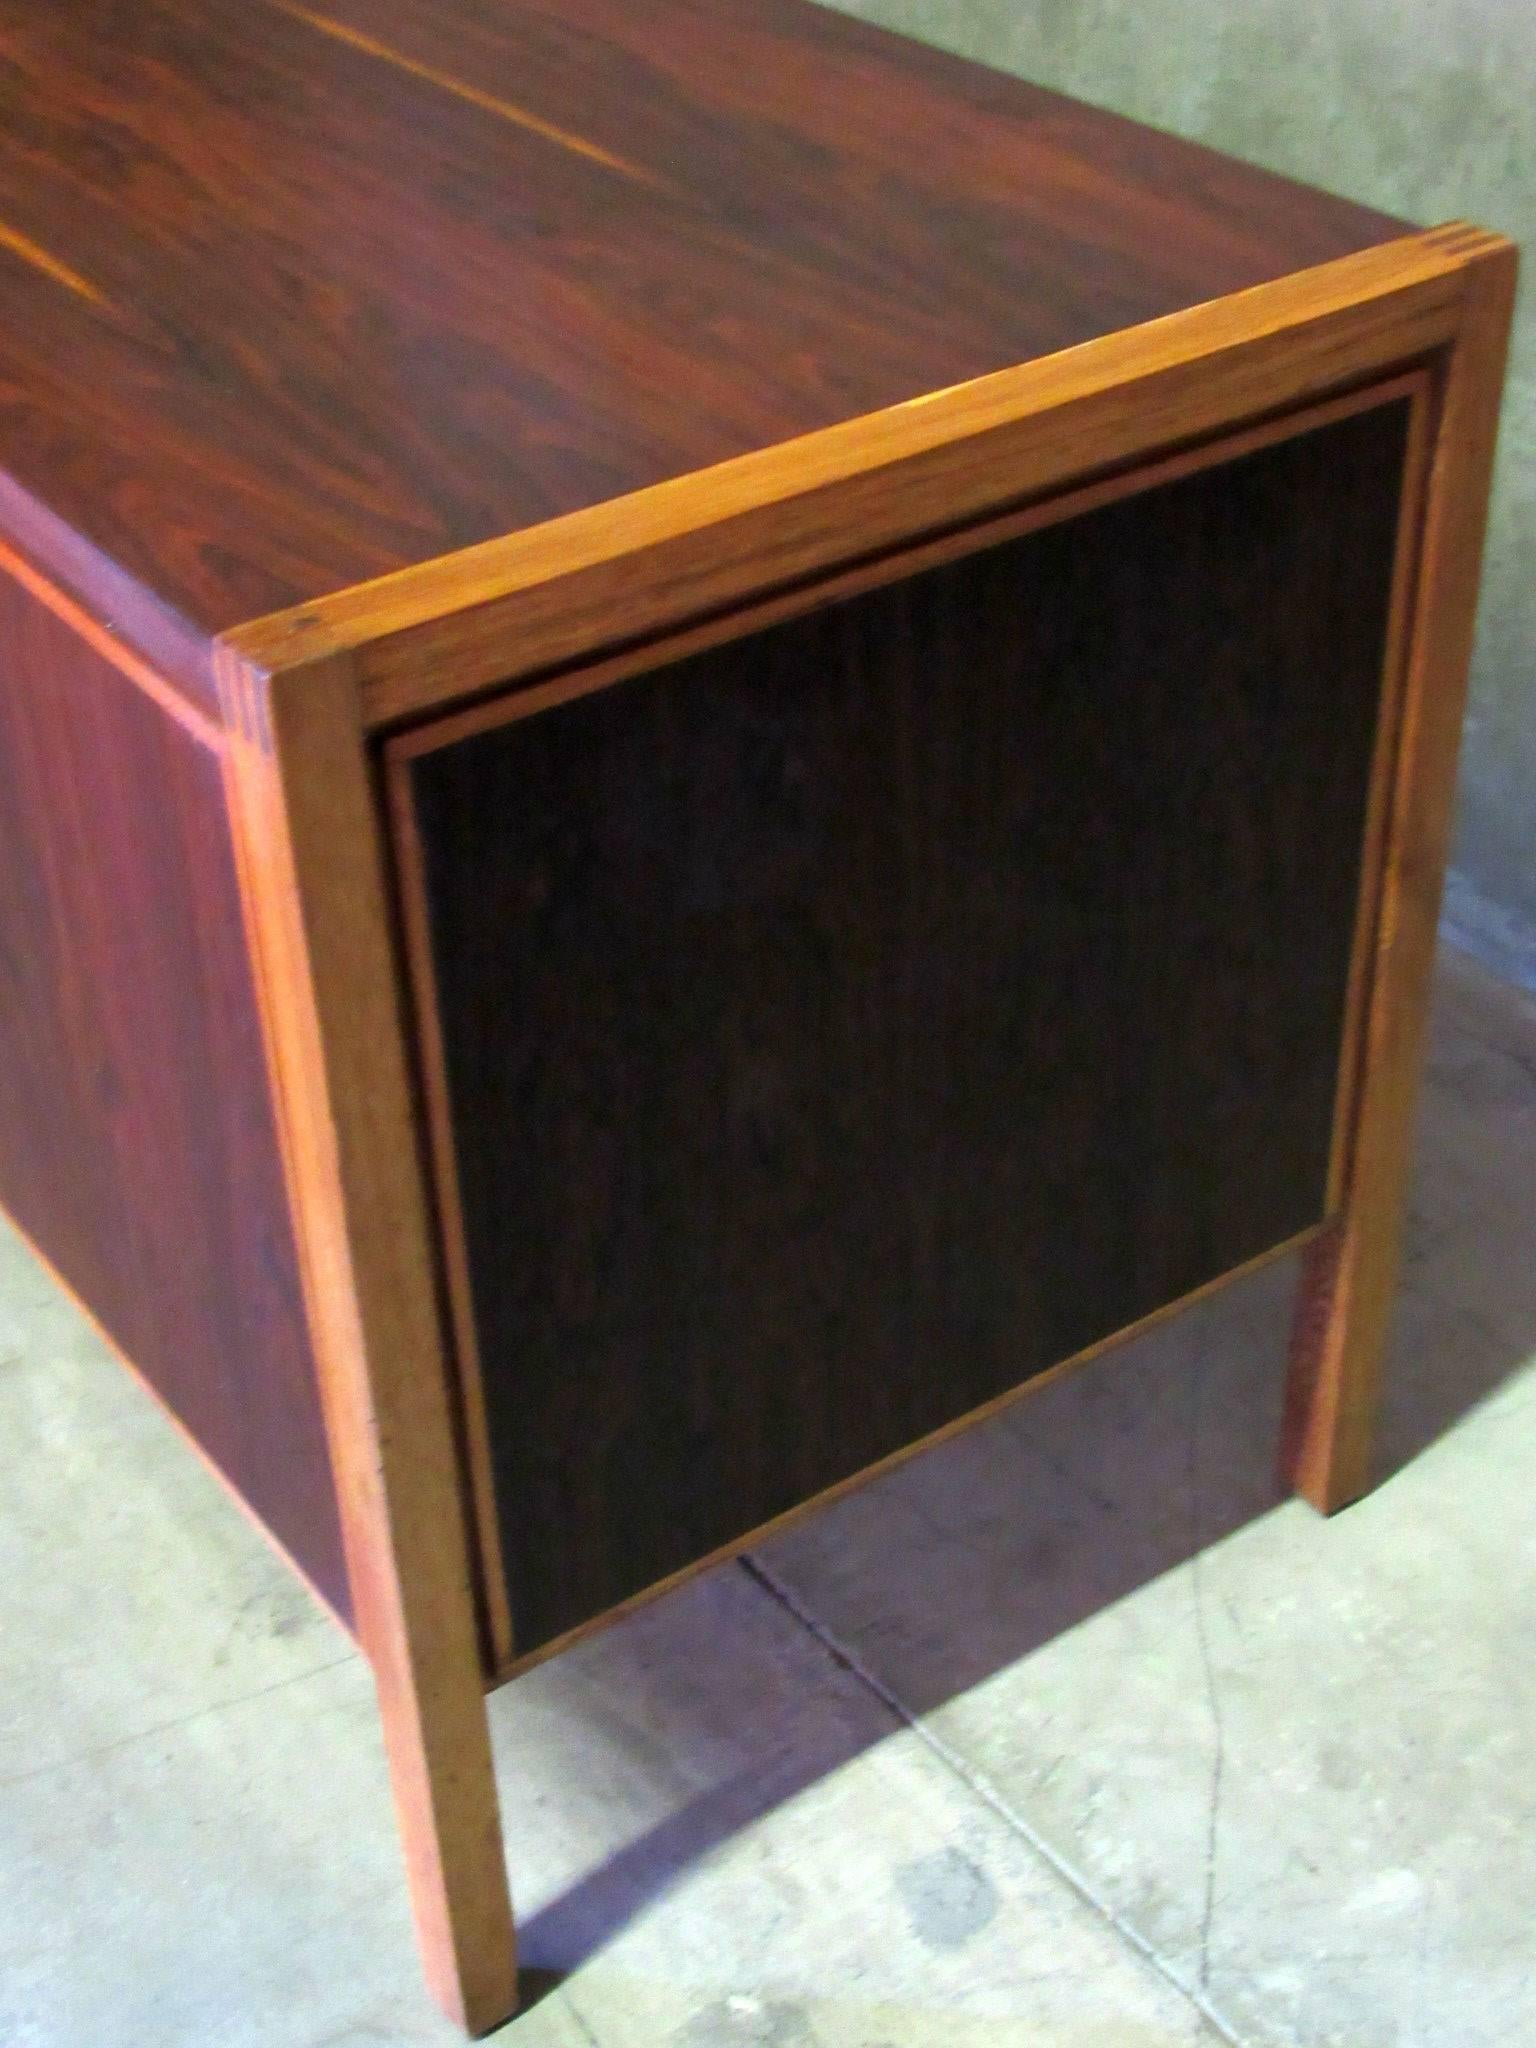 1960s Jacaranda, Rosewood & Teak Mid-Century Modern Desk from Columbia, South America.   Three teal drawers on the right have carved finger handles that inset into the face of the drawers.  The front and sides of the desk are made of Rosewood